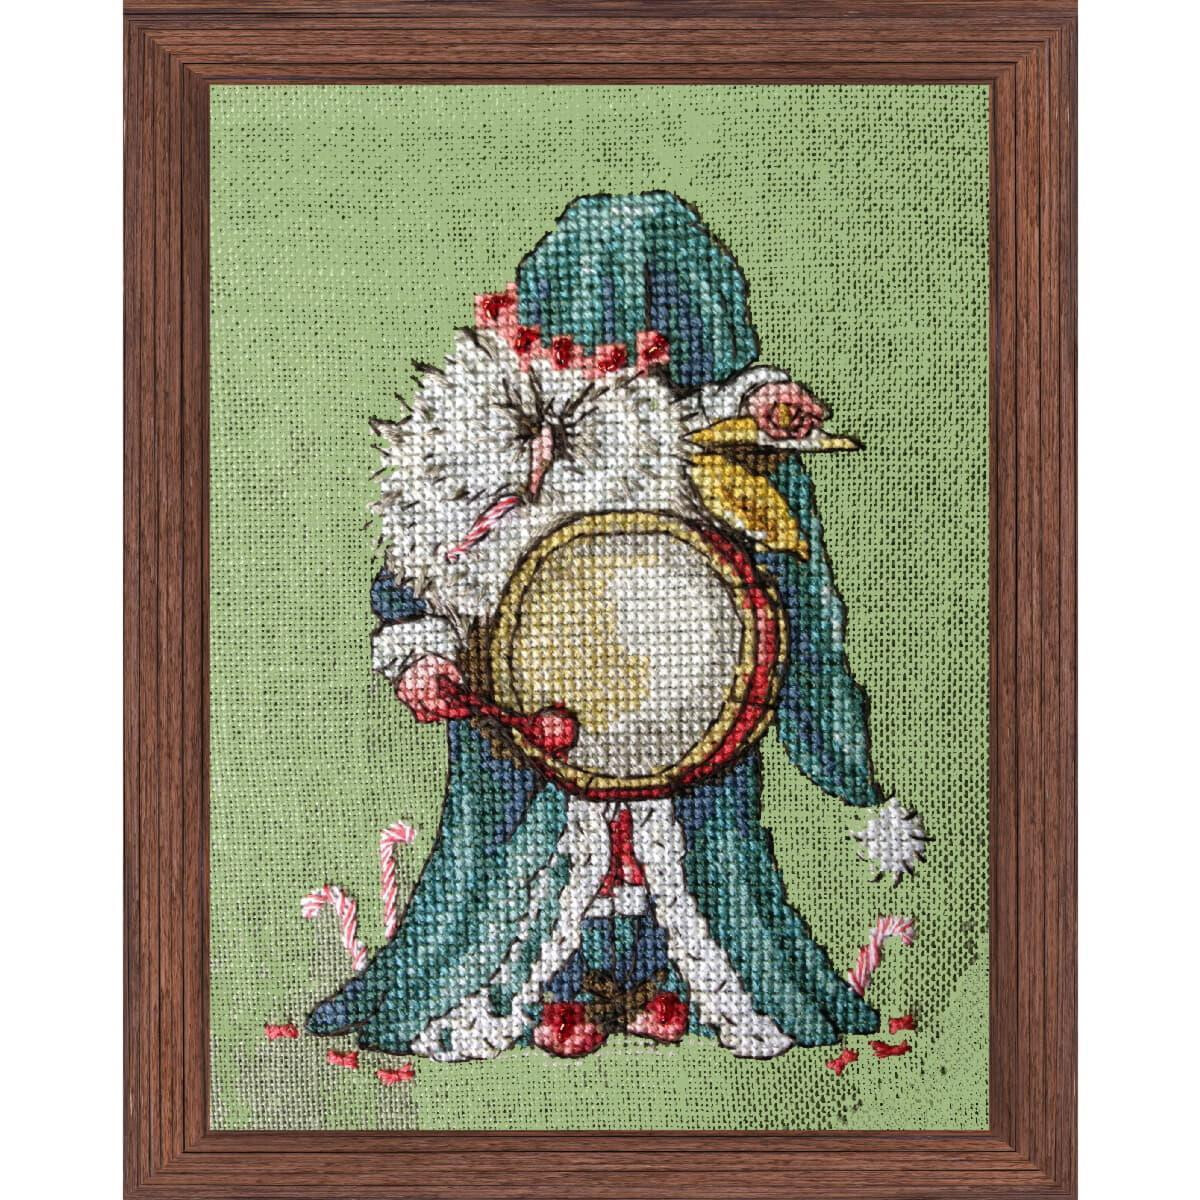 Nimue Cross Stitch counted Chart "The Jultomte Of...